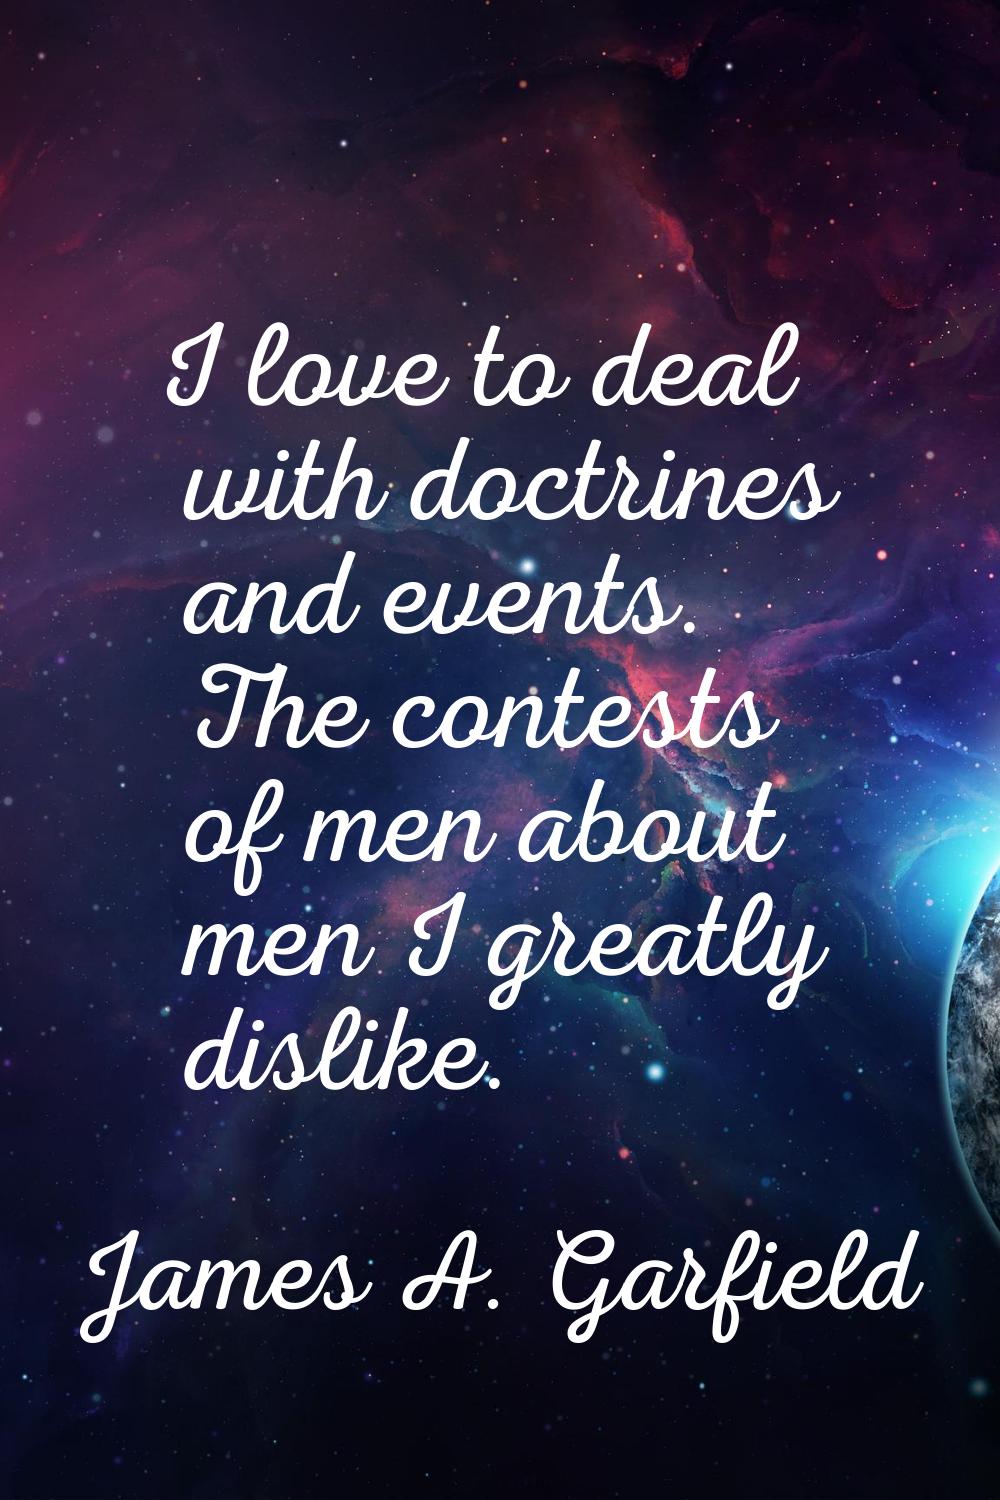 I love to deal with doctrines and events. The contests of men about men I greatly dislike.